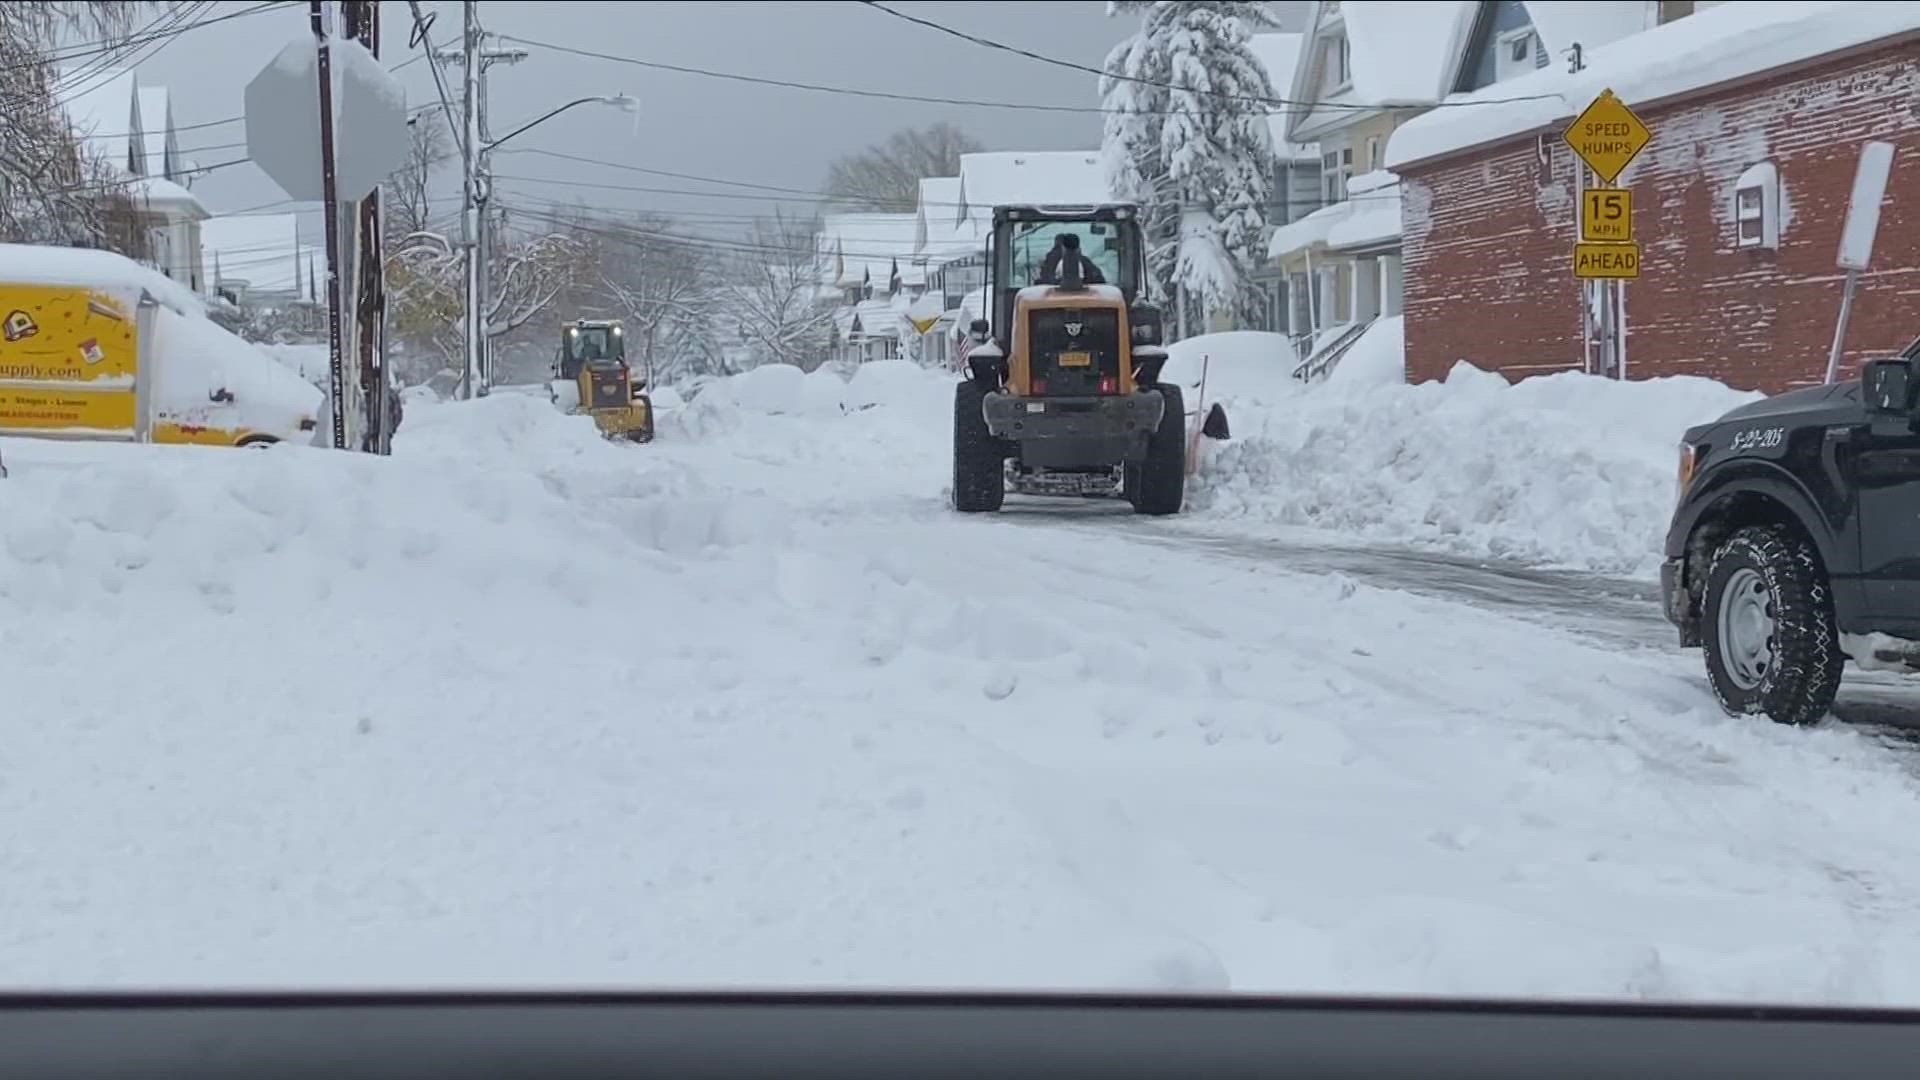 The travel ban is allowing plows to get to the main, secondary, and residential streets, using the city's new snow removal plan.